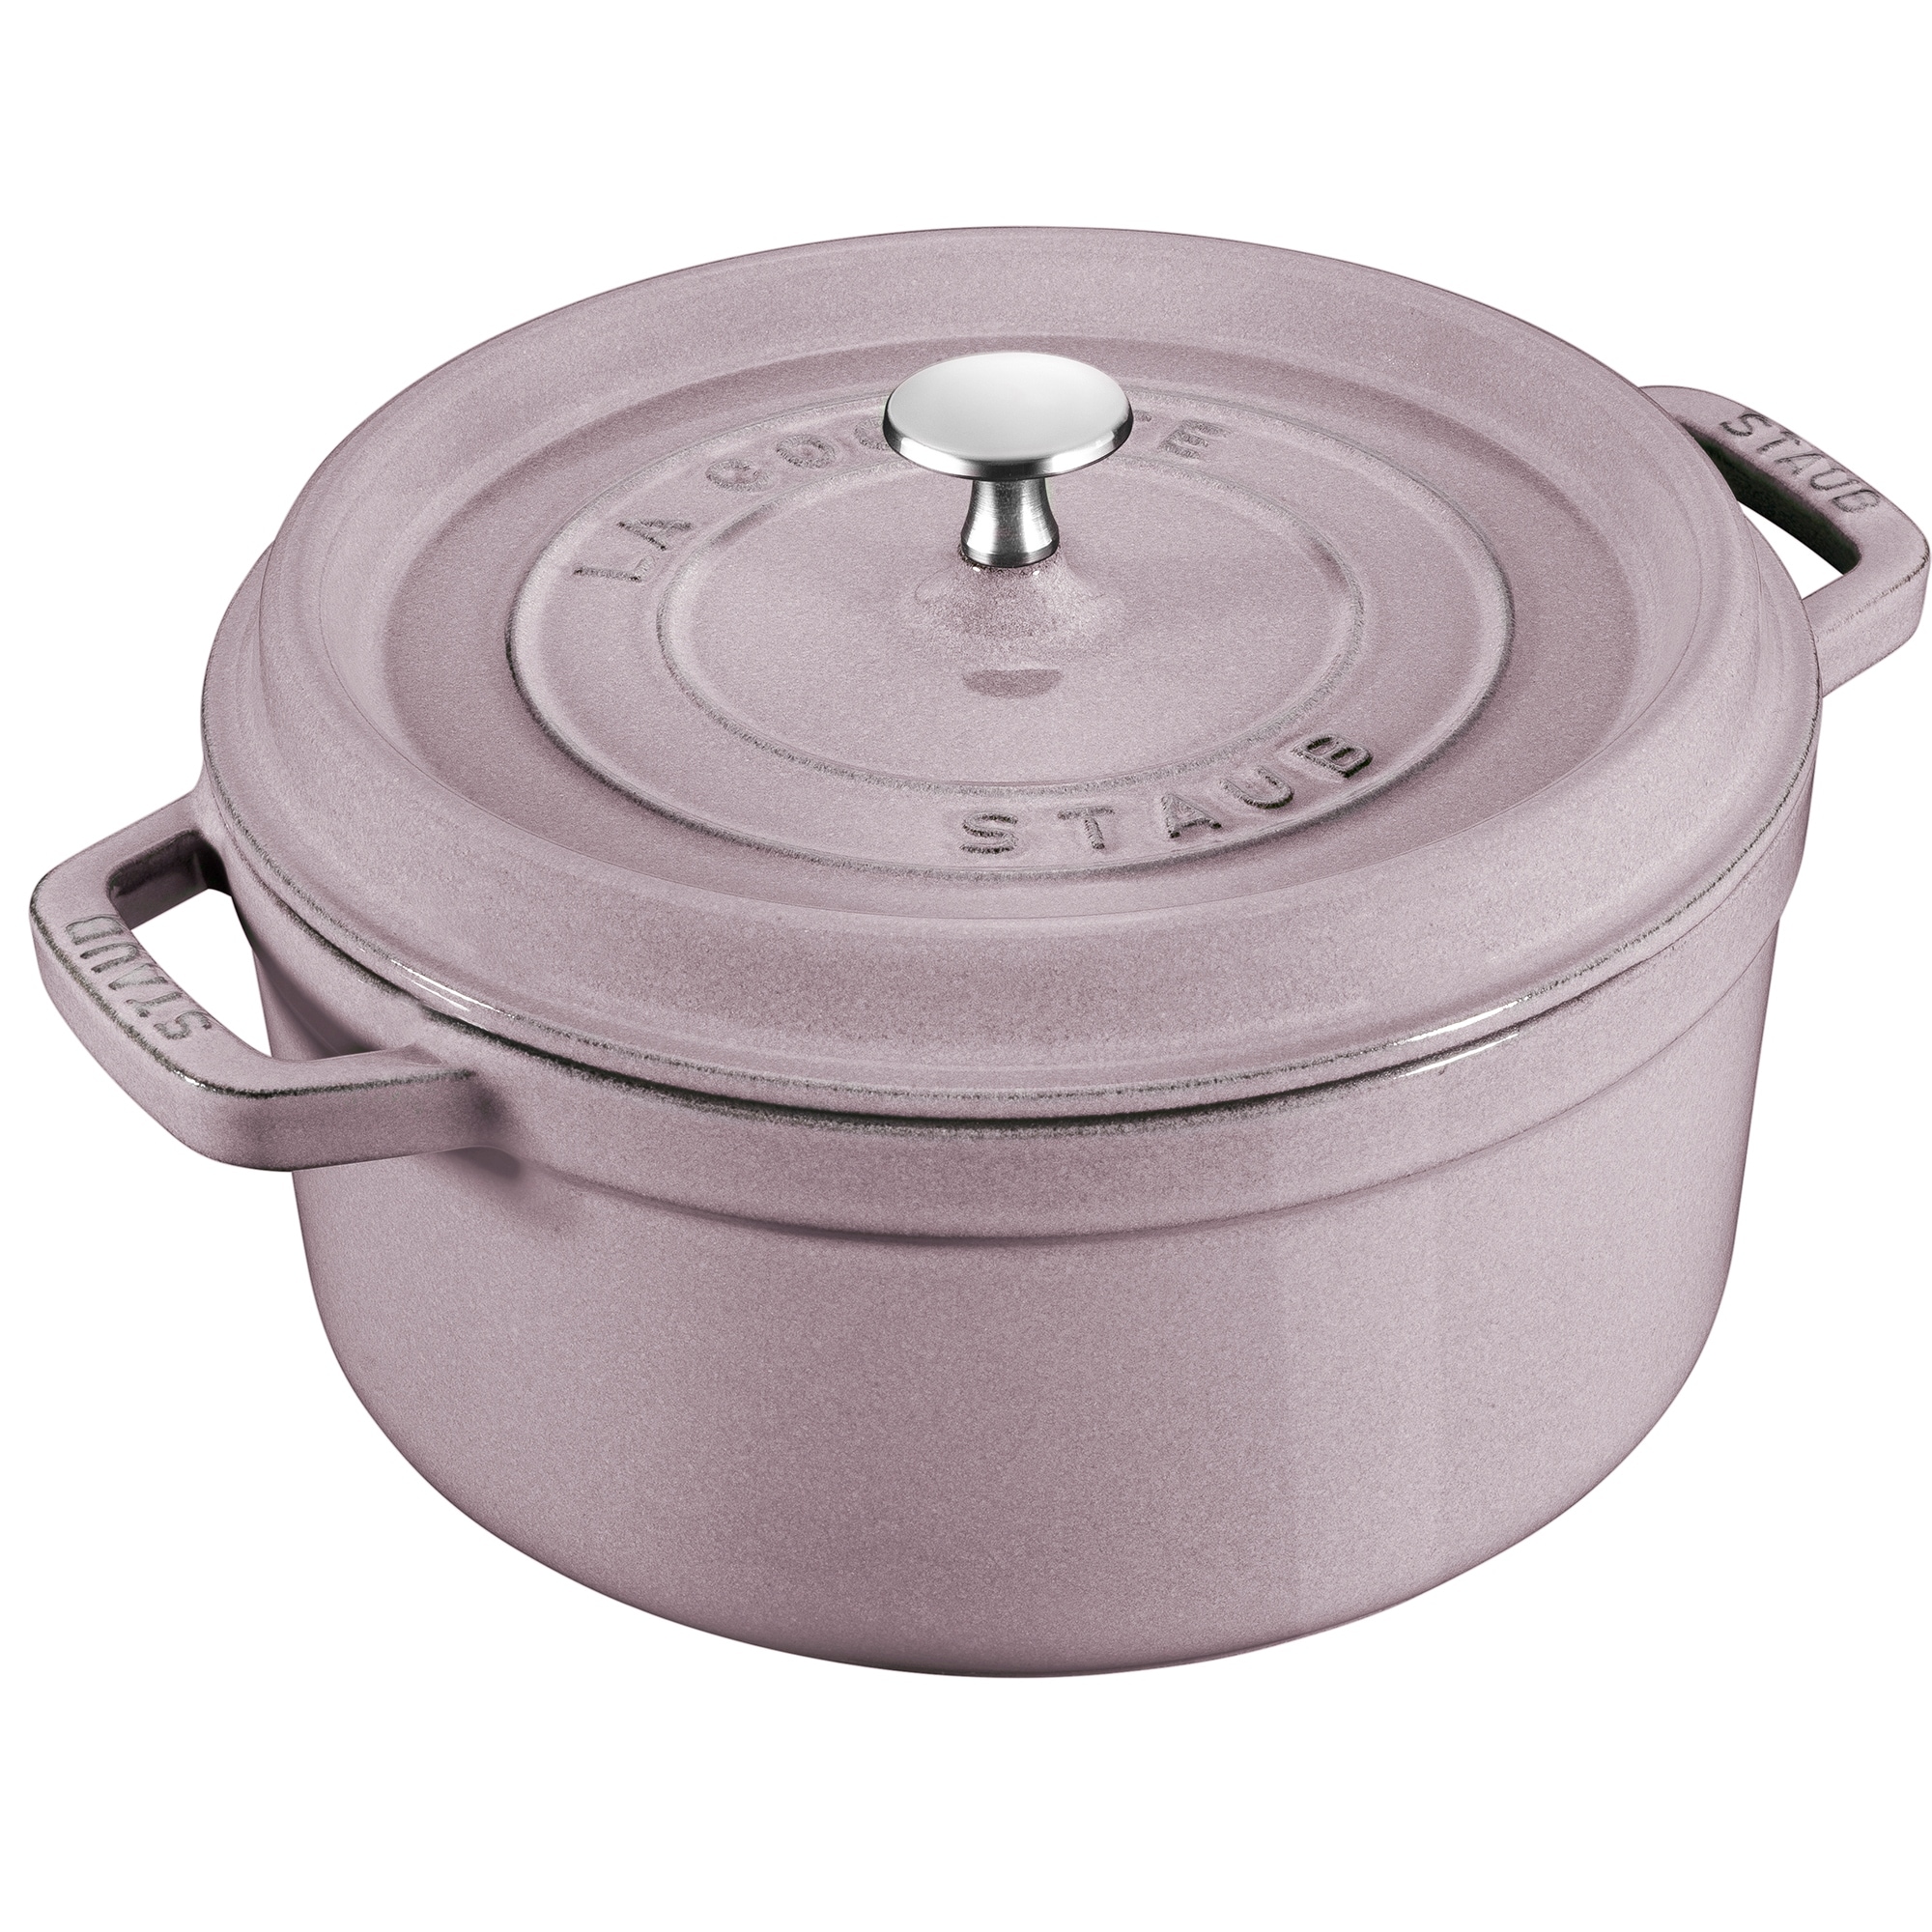 https://ak1.ostkcdn.com/images/products/is/images/direct/6de1f9c31410363b2c0d1252eaa86531a99e716e/STAUB-Cast-Iron-5.5-qt-Round-Cocotte.jpg